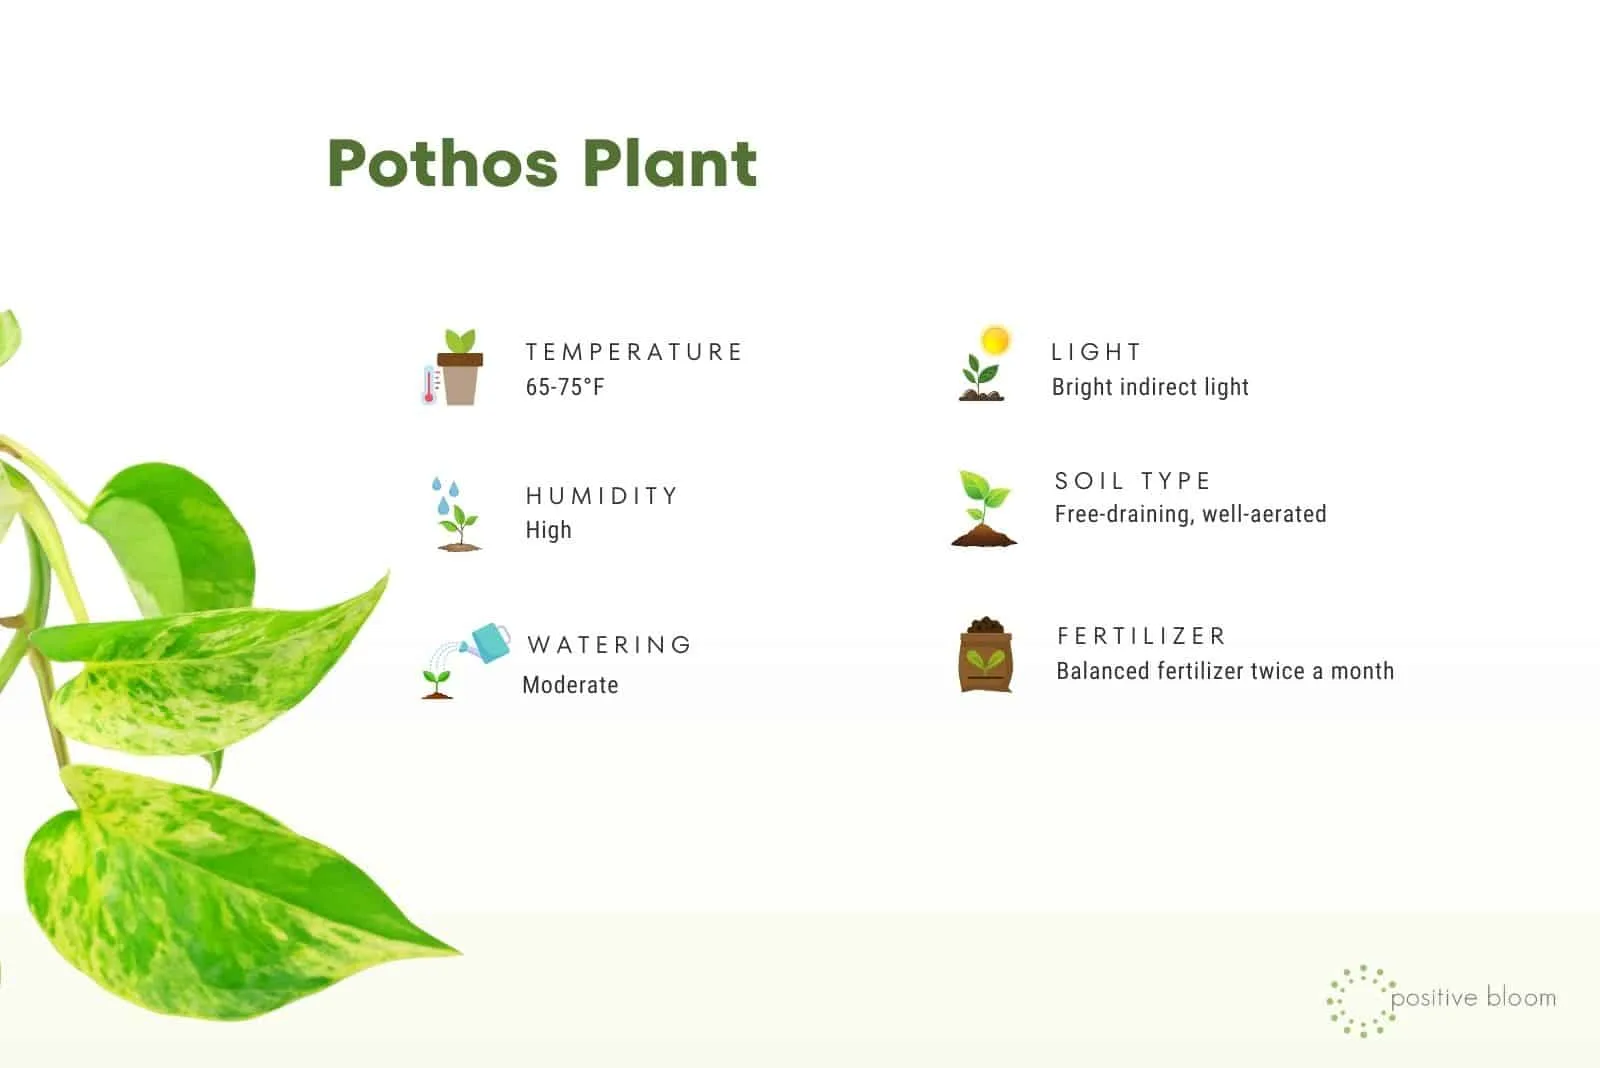 Pothos plant illustrated care guide